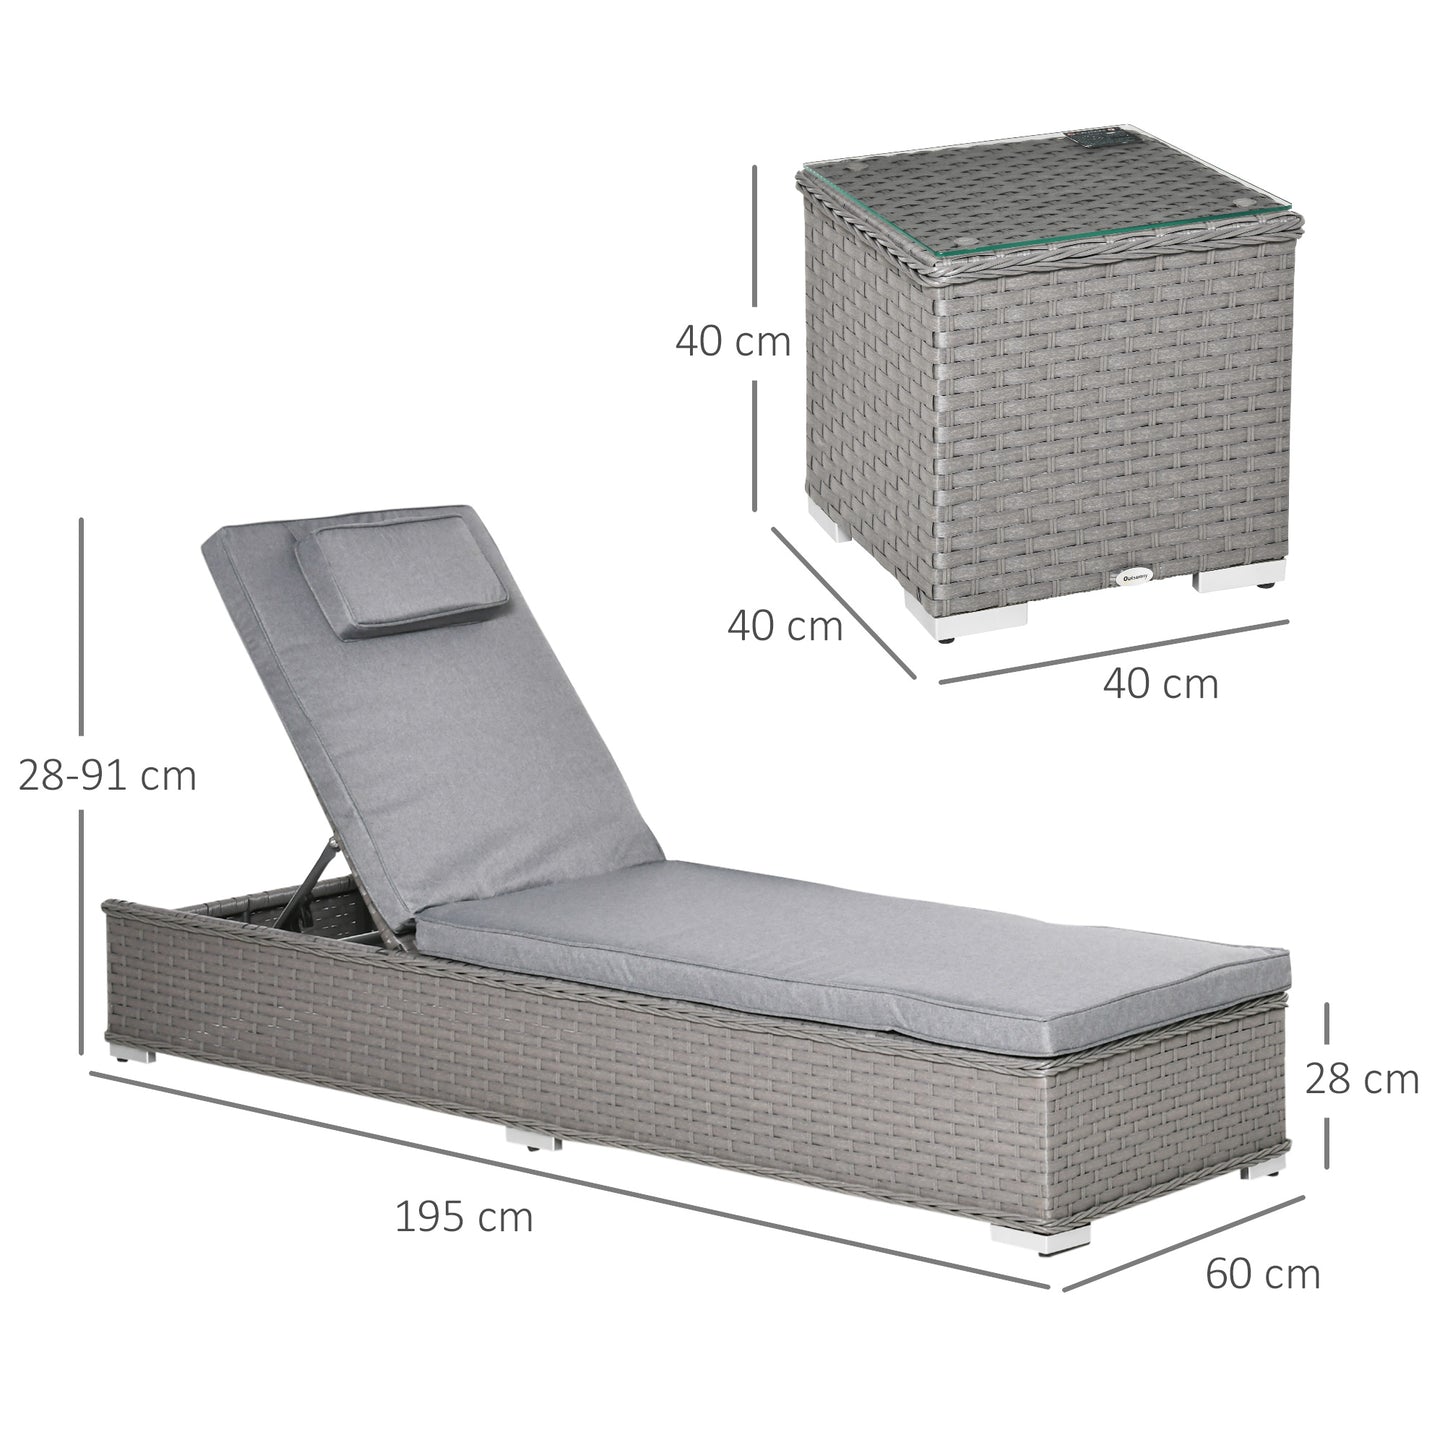 Outsunny 3 Piece Rattan Sun Lounger Set, Garden Furniture with Side Table, 5-Position Adjustable Recline Chair, Grey